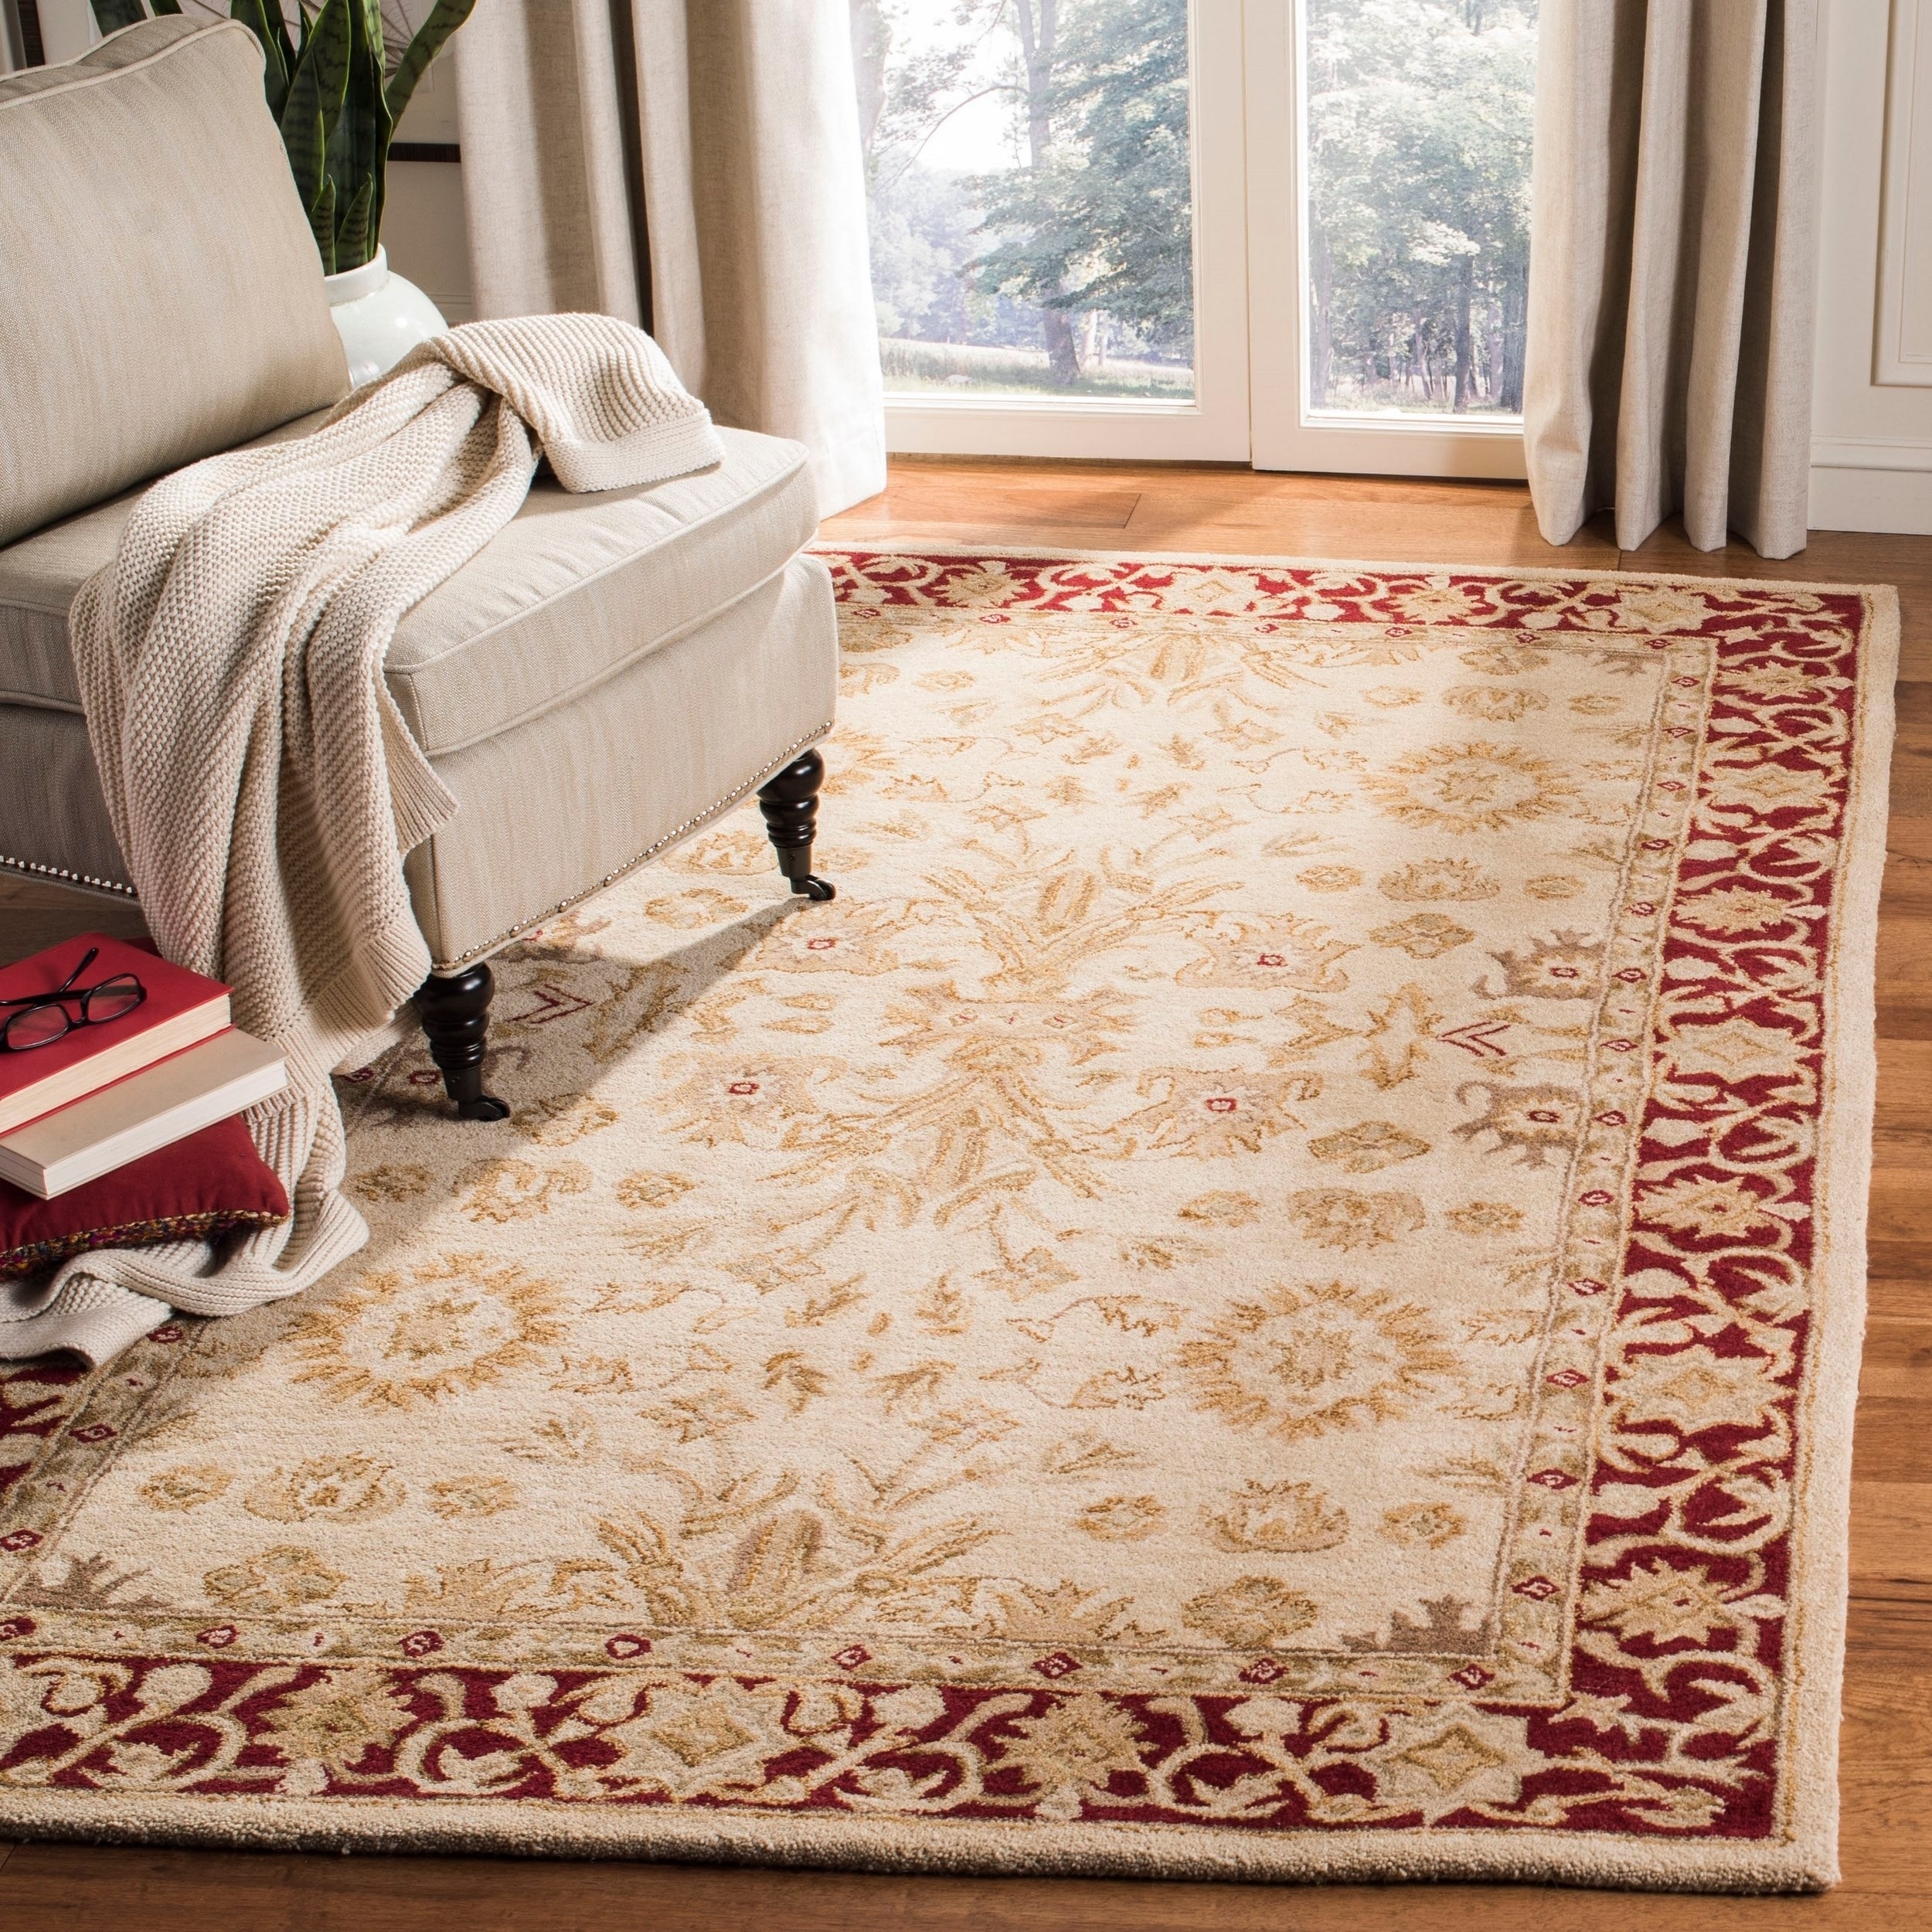 Handmade Mashad Ivory/ Red Wool Rug (5 X 8) (IvoryPattern OrientalMeasures 0.625 inch thickTip We recommend the use of a non skid pad to keep the rug in place on smooth surfaces.All rug sizes are approximate. Due to the difference of monitor colors, som